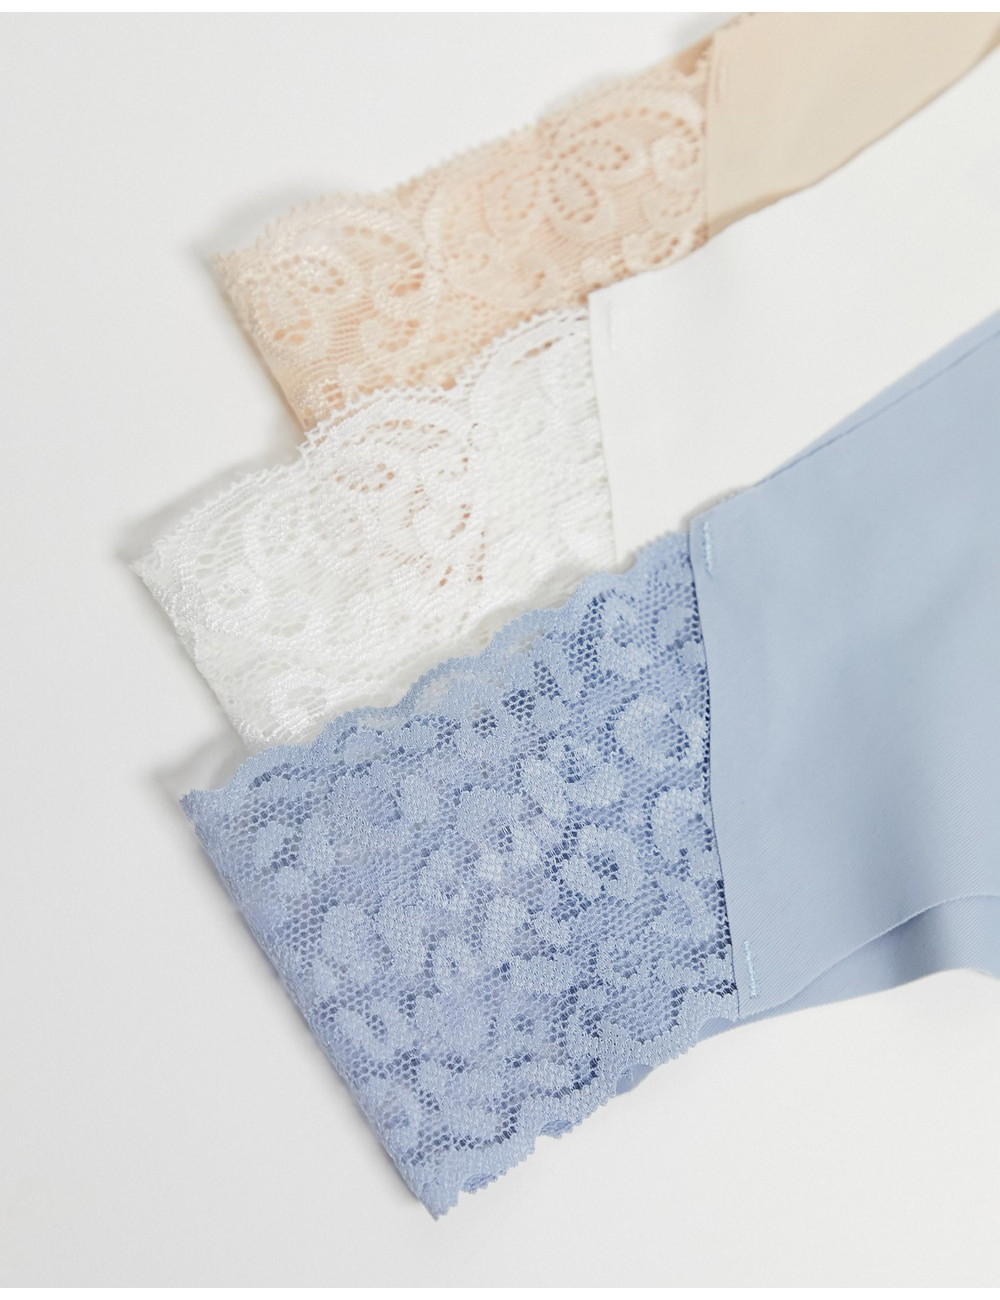 Cotton:On lace side...